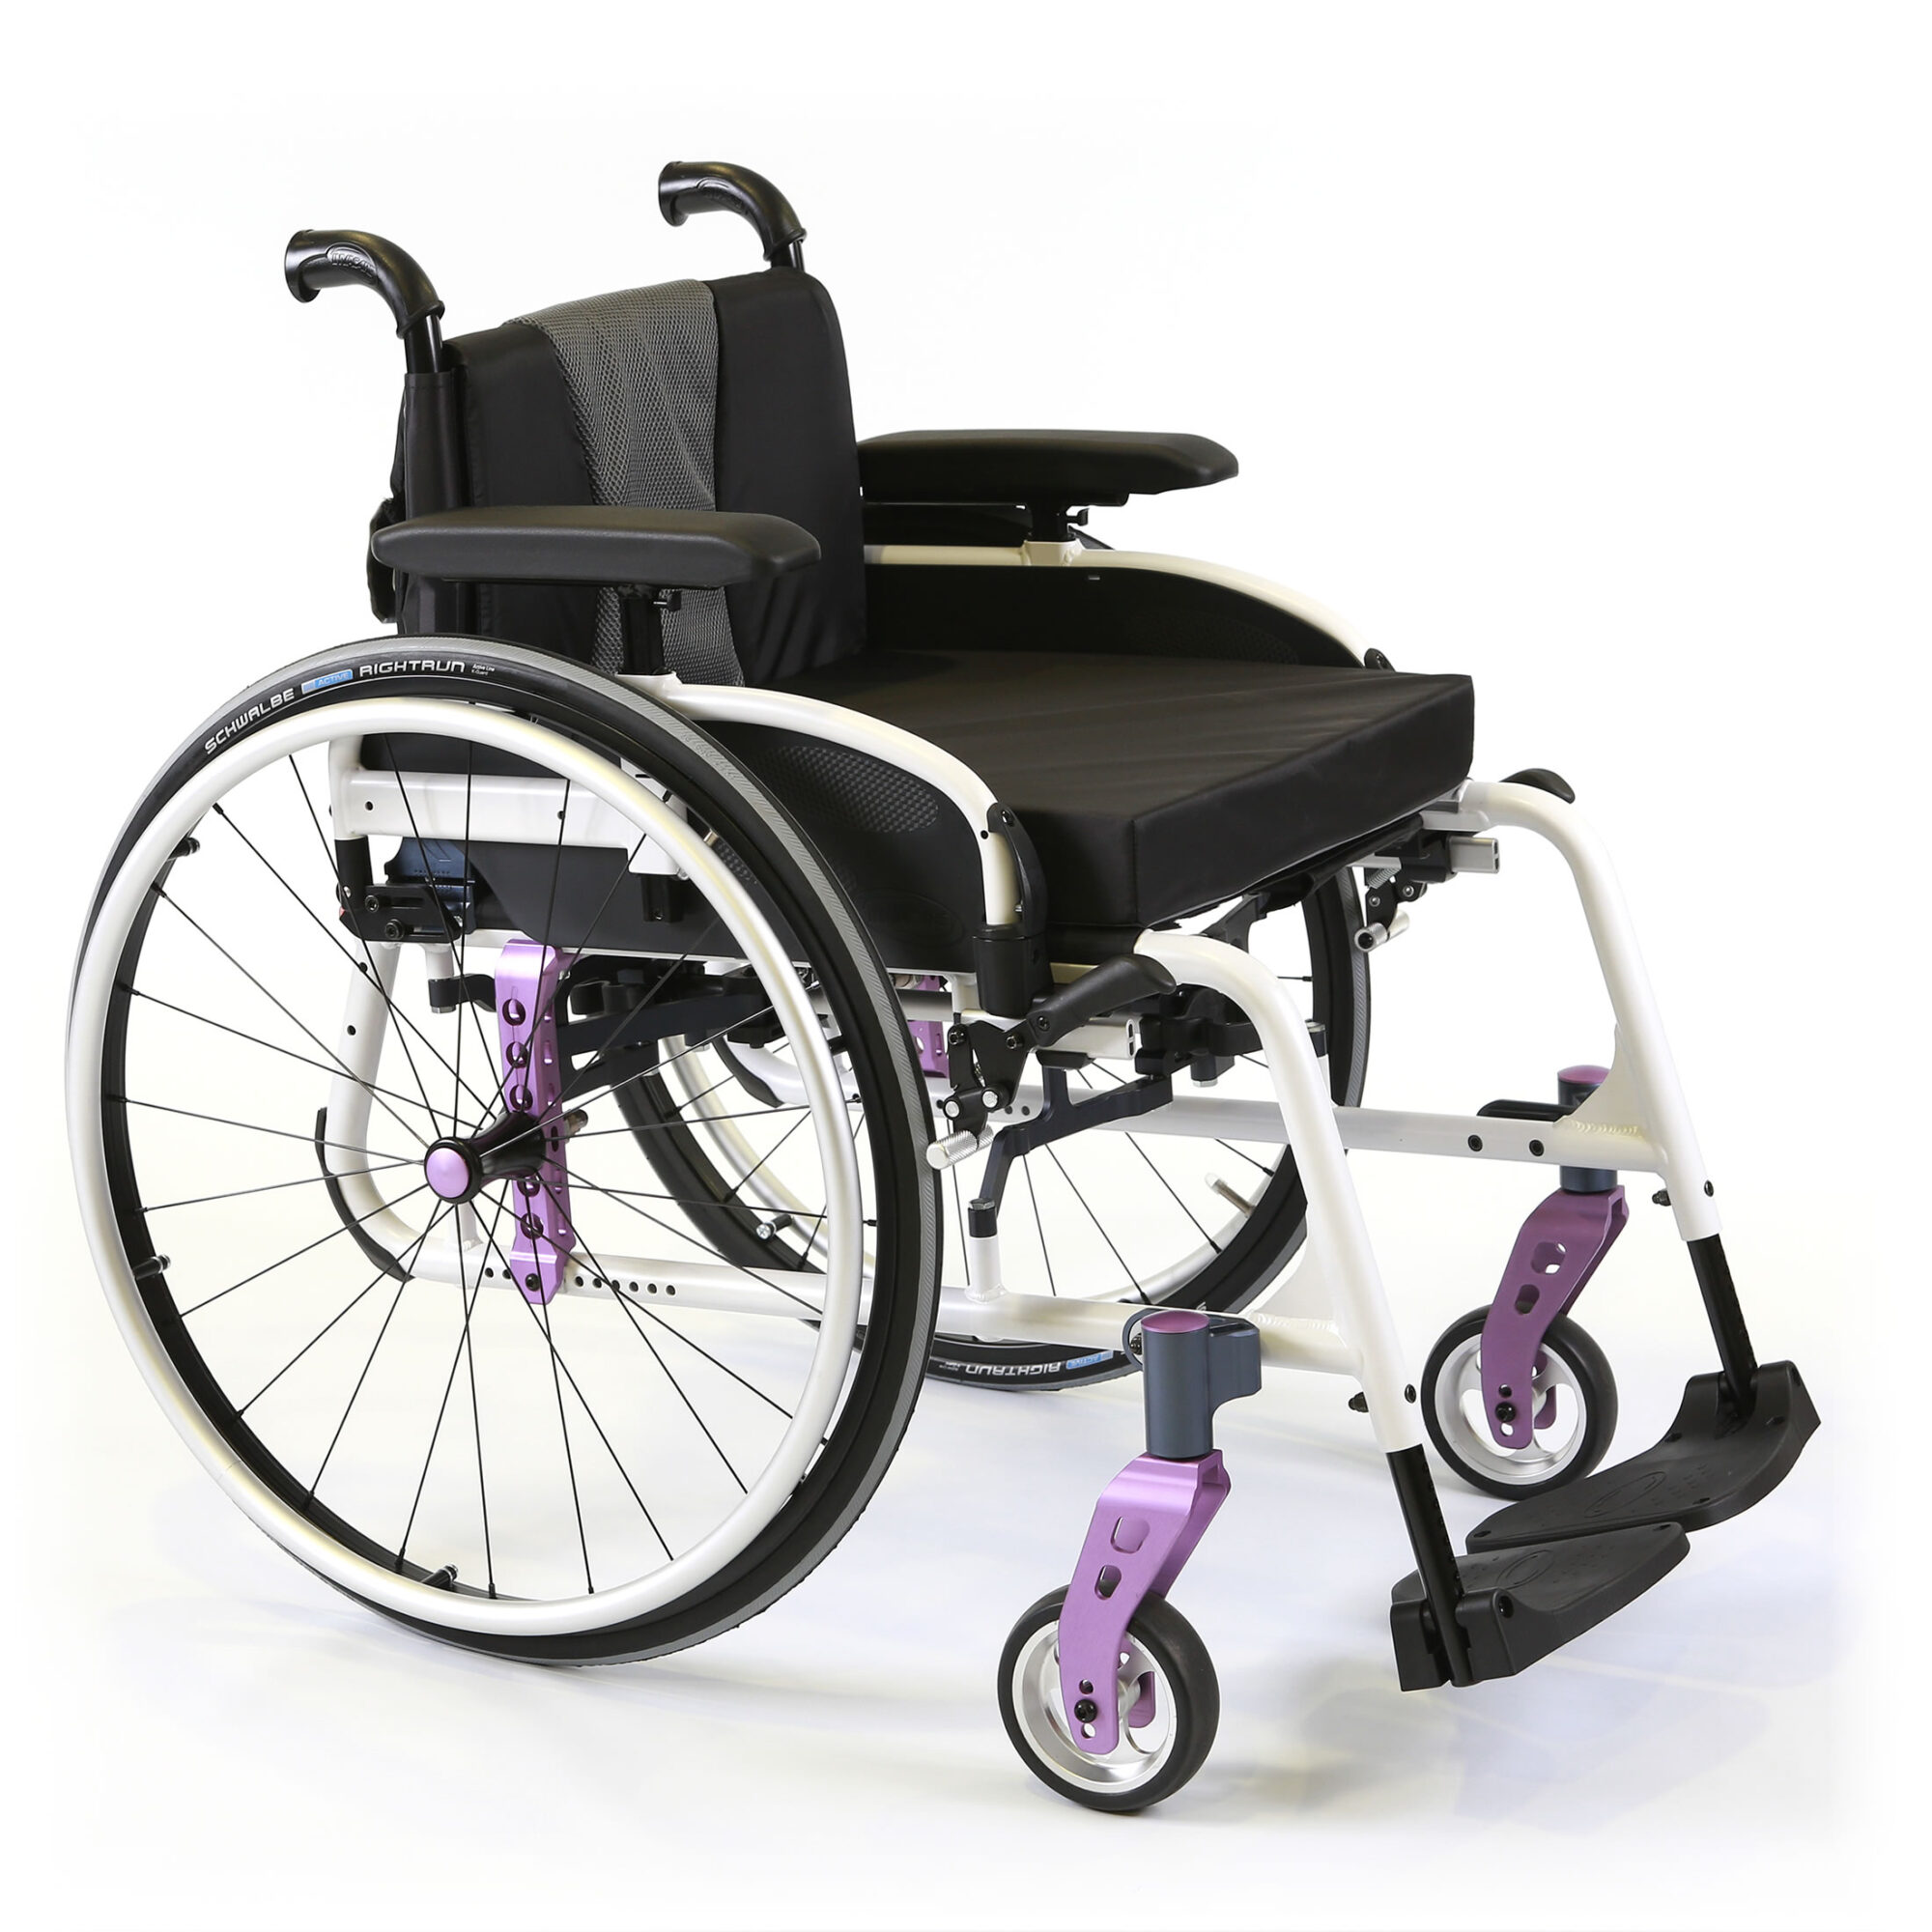 https://www.recare.co.uk/wp-content/uploads/2022/06/Invacare-Action-5NG-Folding-Manual-Self-Propel-Wheelchair-2.jpg